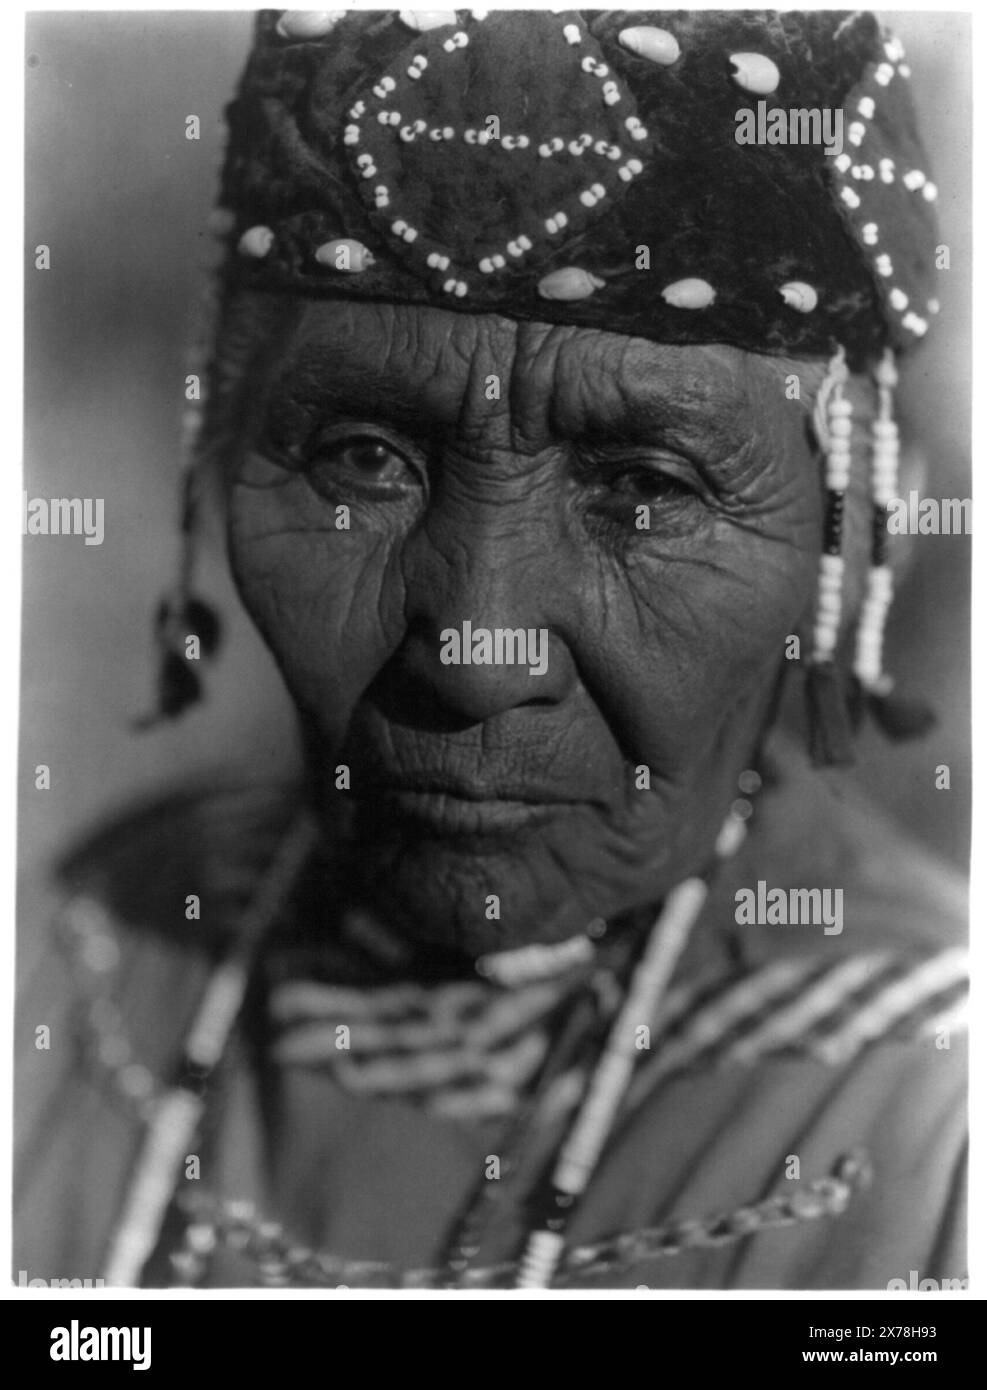 Wife of Modoc Henry A Klamath, Curtis no. 3904., Forms part of: Edward S. Curtis Collection ., Published in: The North American Indian / Edward S. Curtis. [Seattle, Wash.] : Edward S. Curtis, 1907-30, Suppl., v. 13, pl. 445.. Indians of North America, Women, Oregon, 1920-1930. , Klamath Indians, Women, Oregon, 1920-1930. Stock Photo